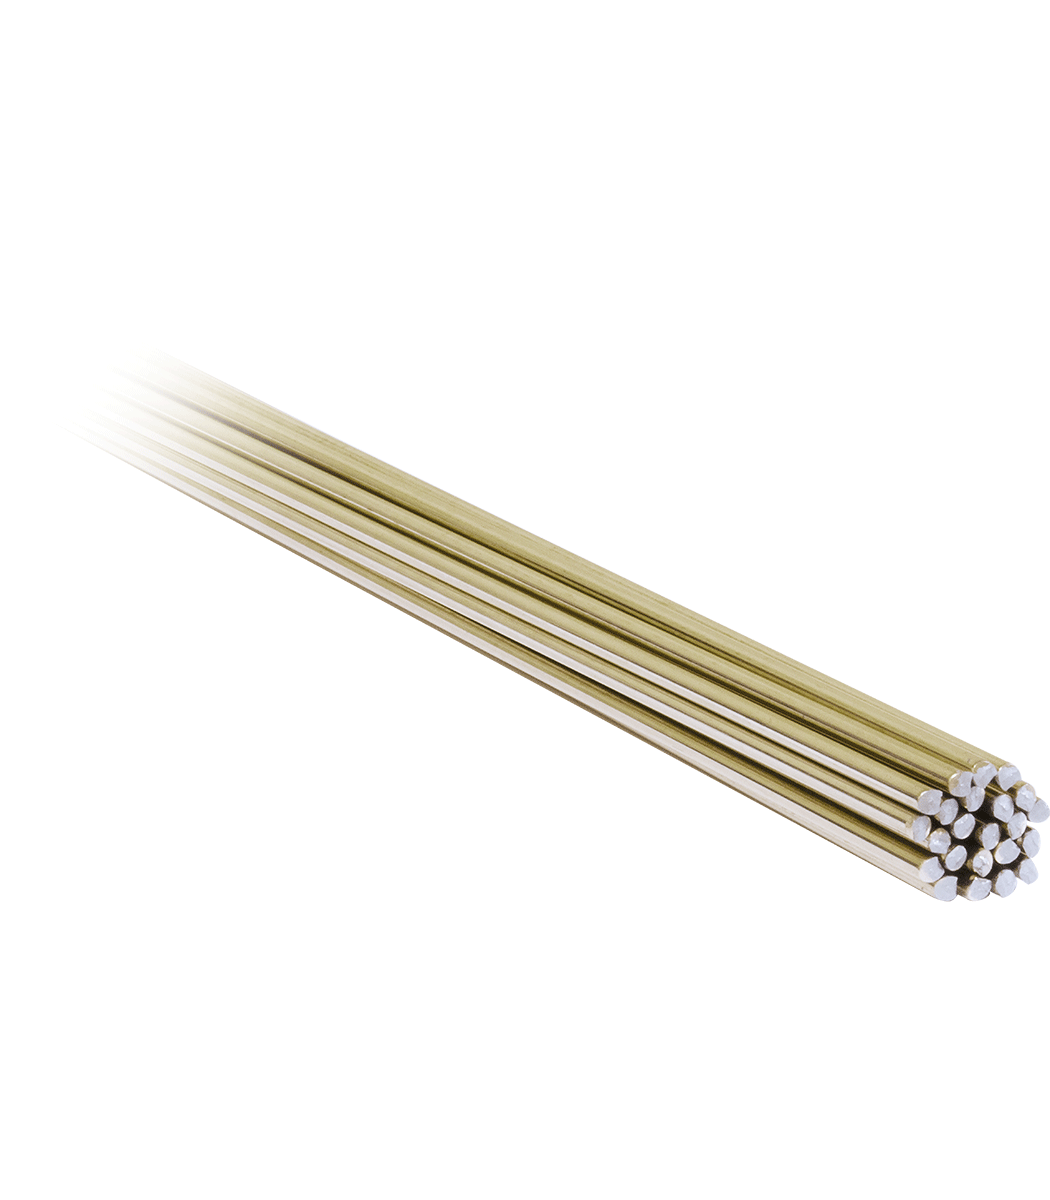 Wesbite Name: 56% Silver Brazing Rods